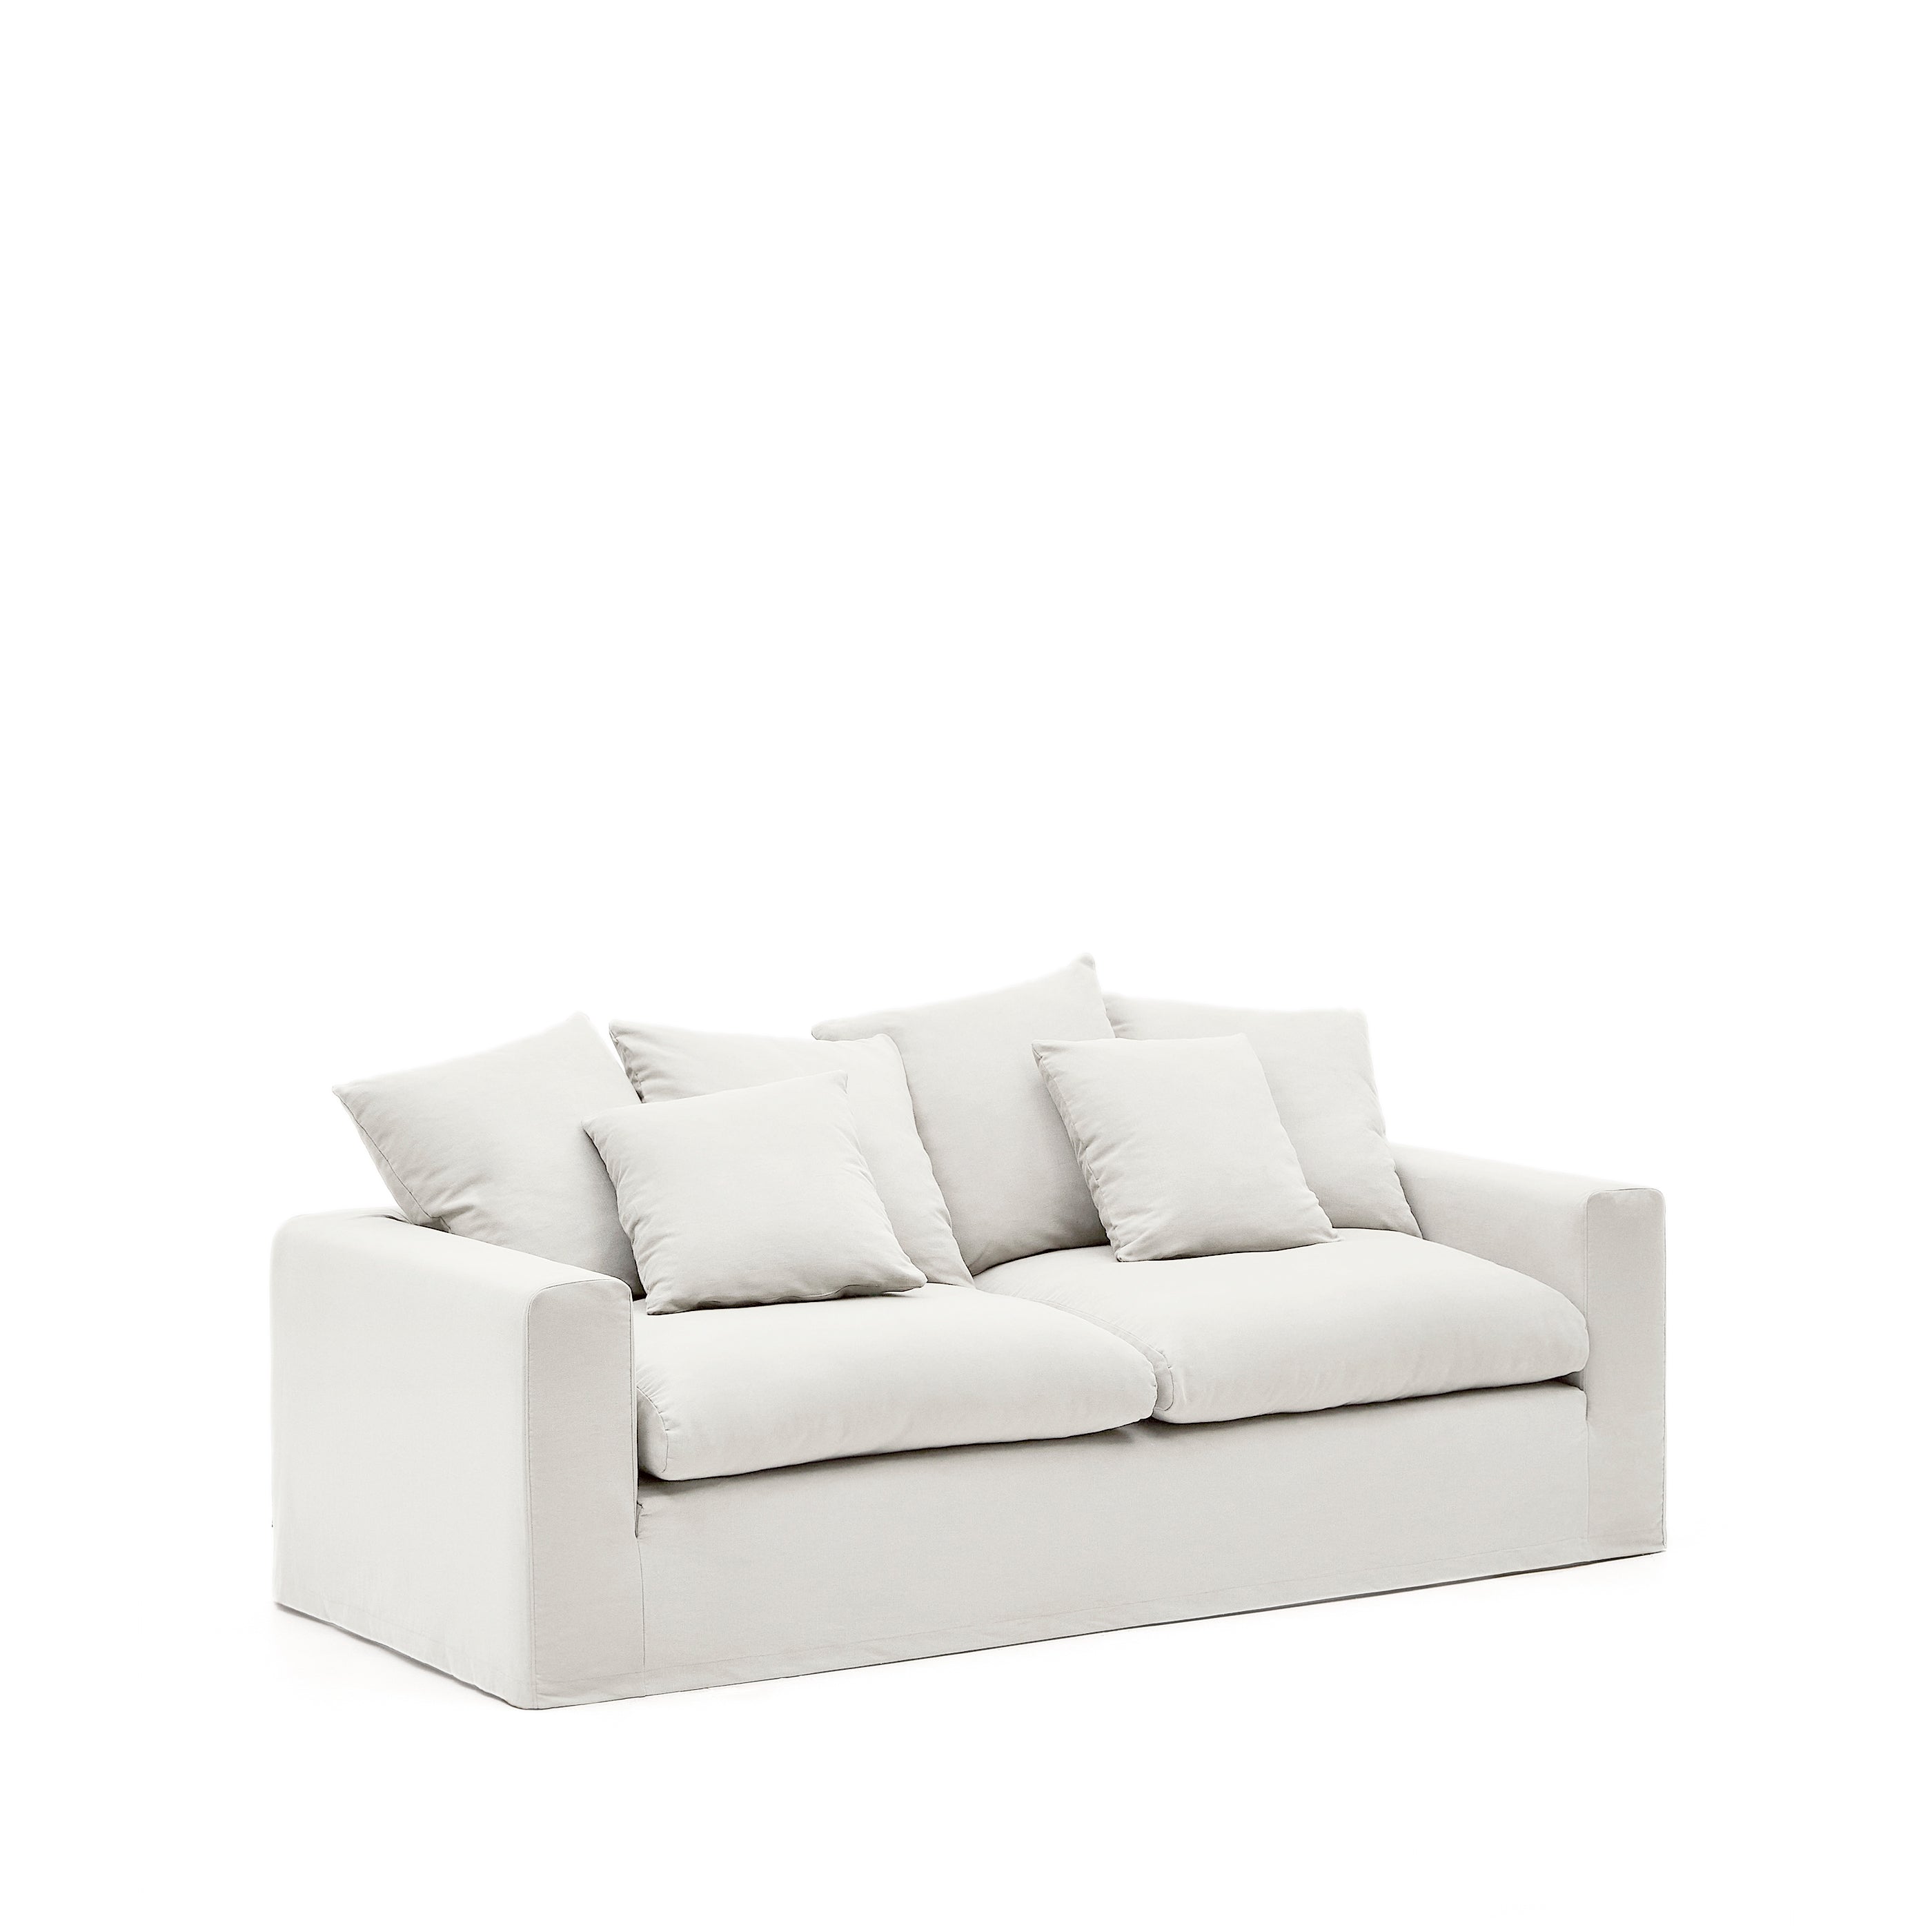 Nora three-seater sofa with removable cover and ecru linen and cotton cushions, 240 cm